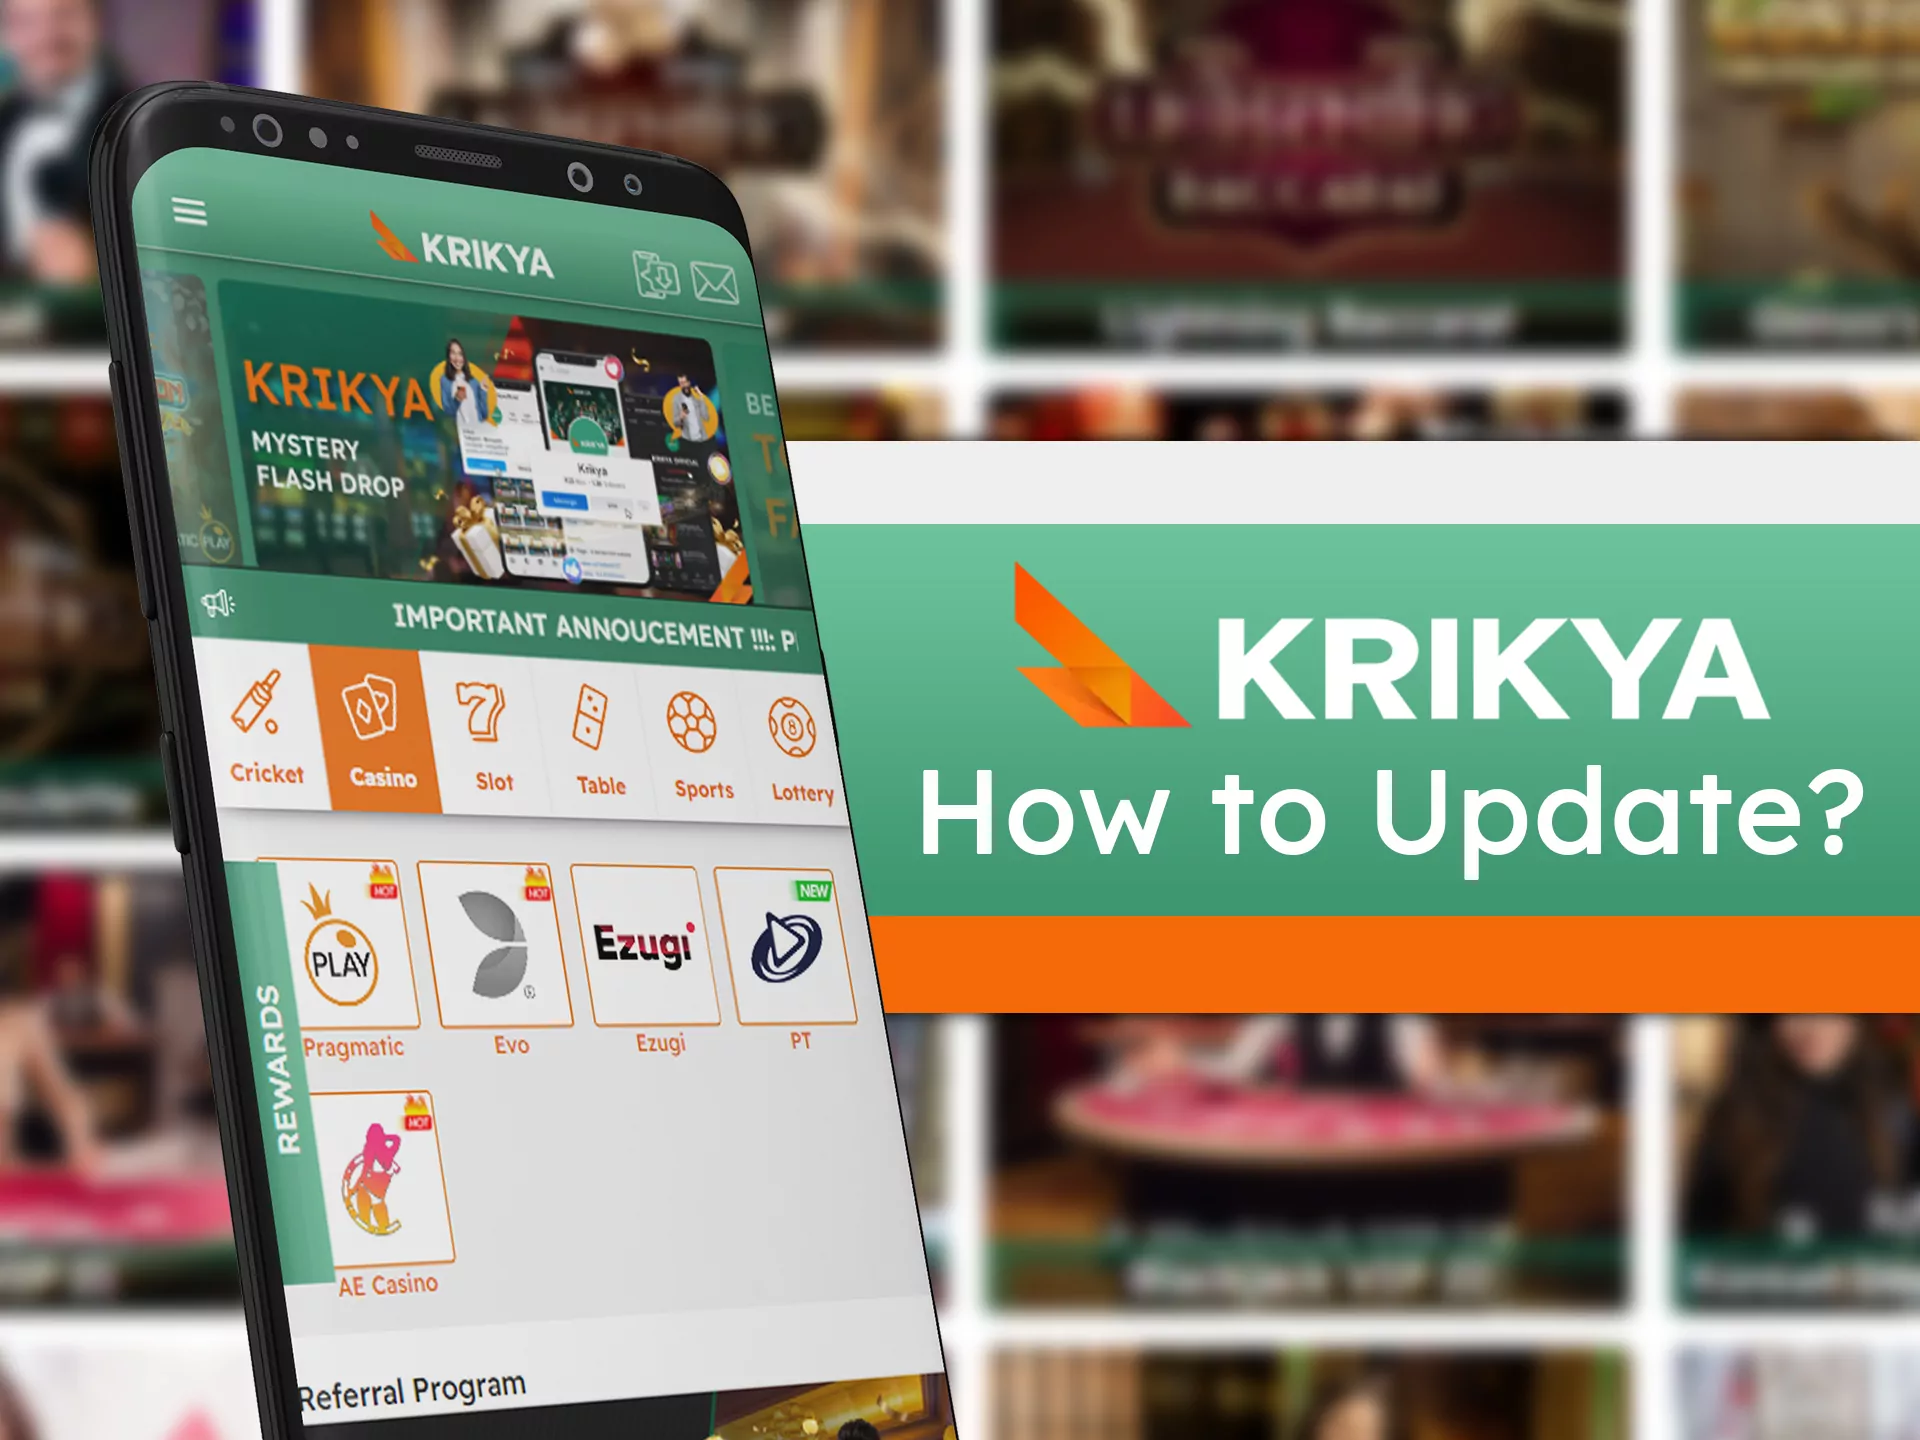 You don't need to update your Krikya app.